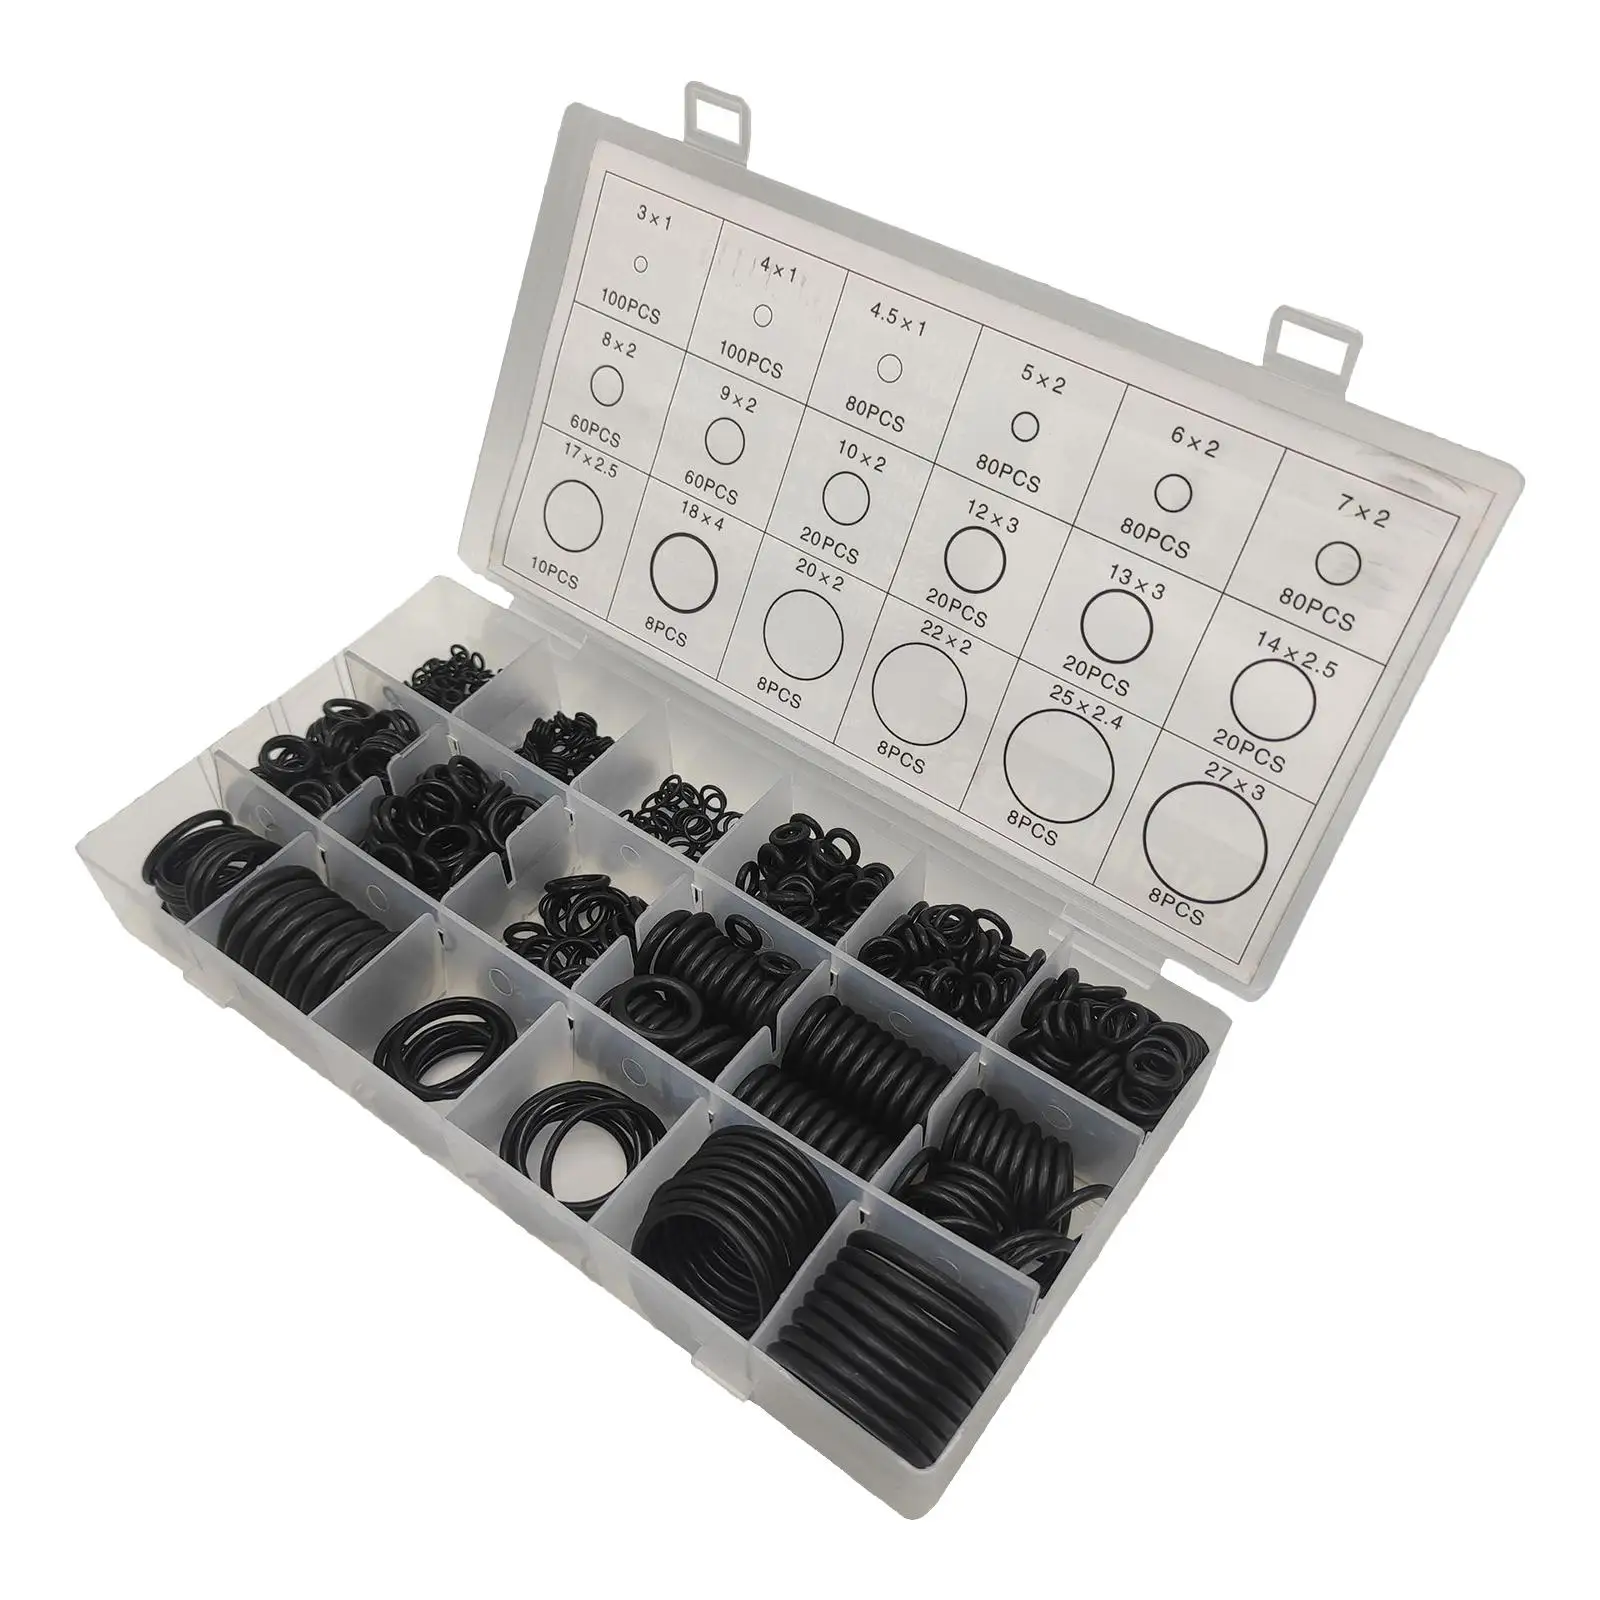 O Rings Assortment kit Black Sealing Gasket Washers for Auto Quick Repair Air or Gas Connections Plumbing Washer Seal